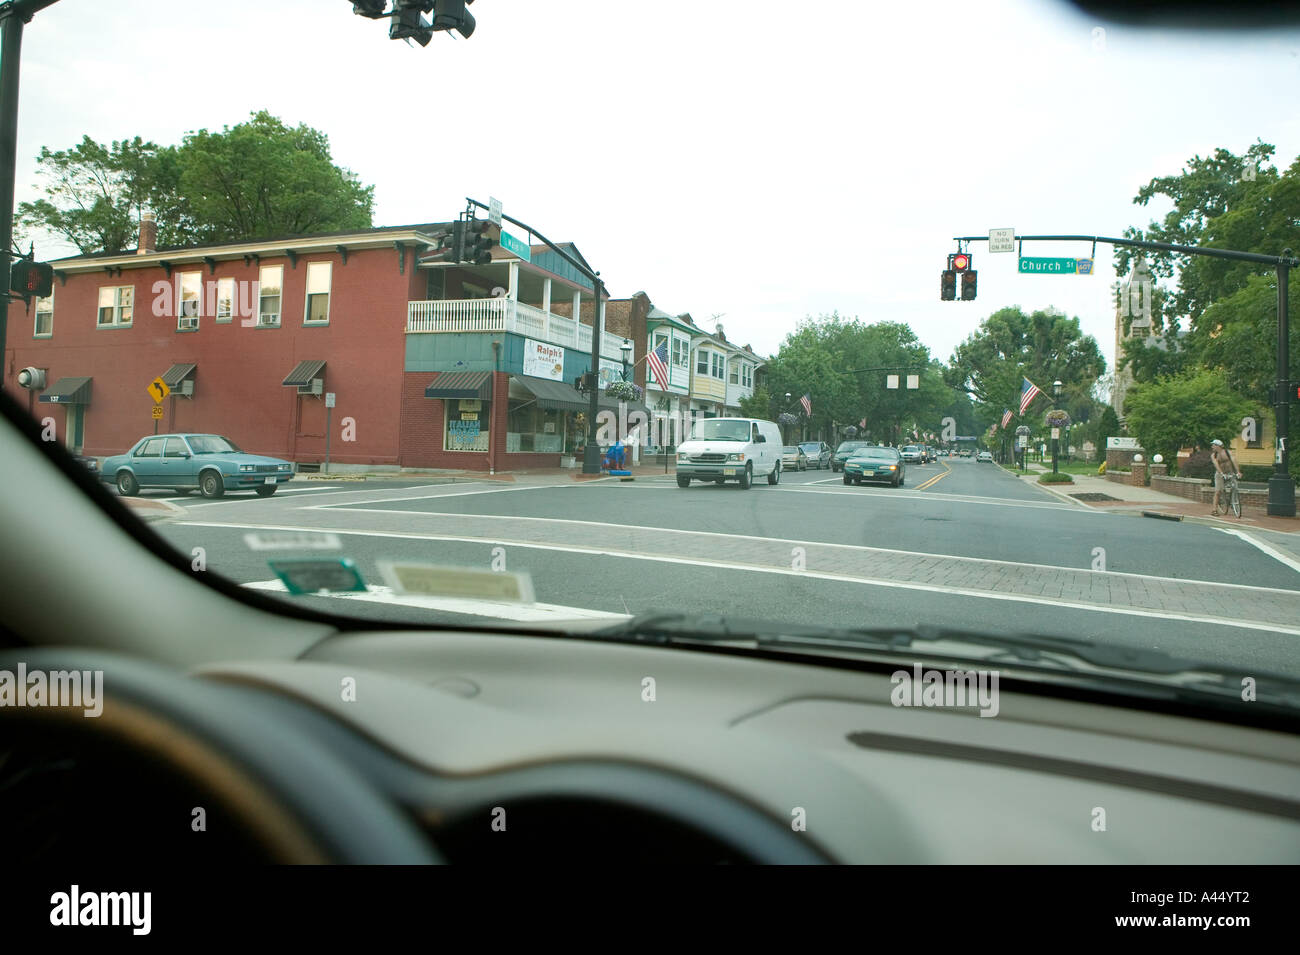 View of traffic in the streets of the town of Moorestown NJ in New Jersey USA July 2005 from inside a car Stock Photo